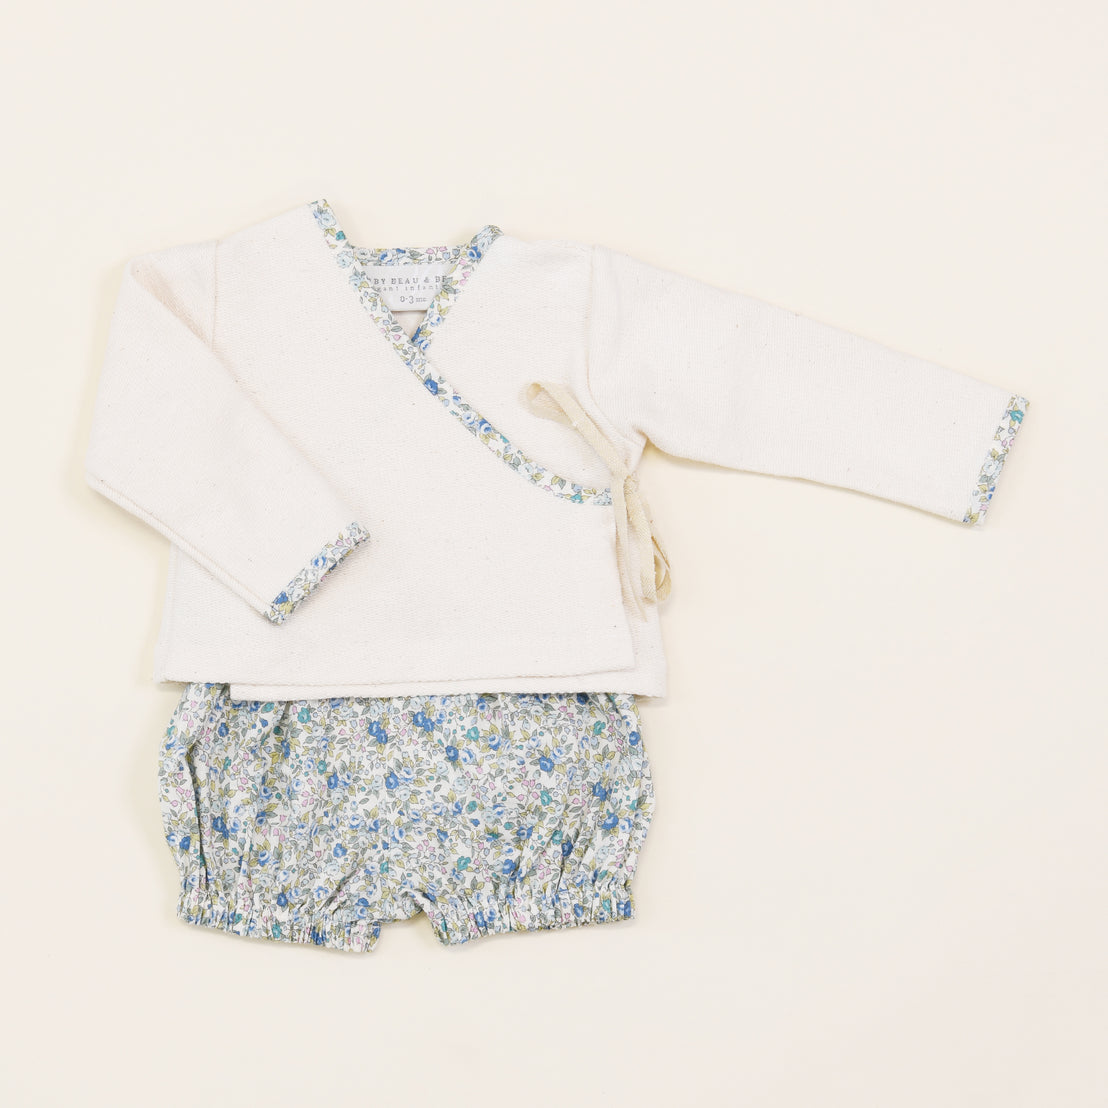 An upscale, vintage-inspired Petite Fleur Wrap Top & Bloomers set laid flat on a light beige background. The top is white with floral trim, and the shorts feature a blue floral print.